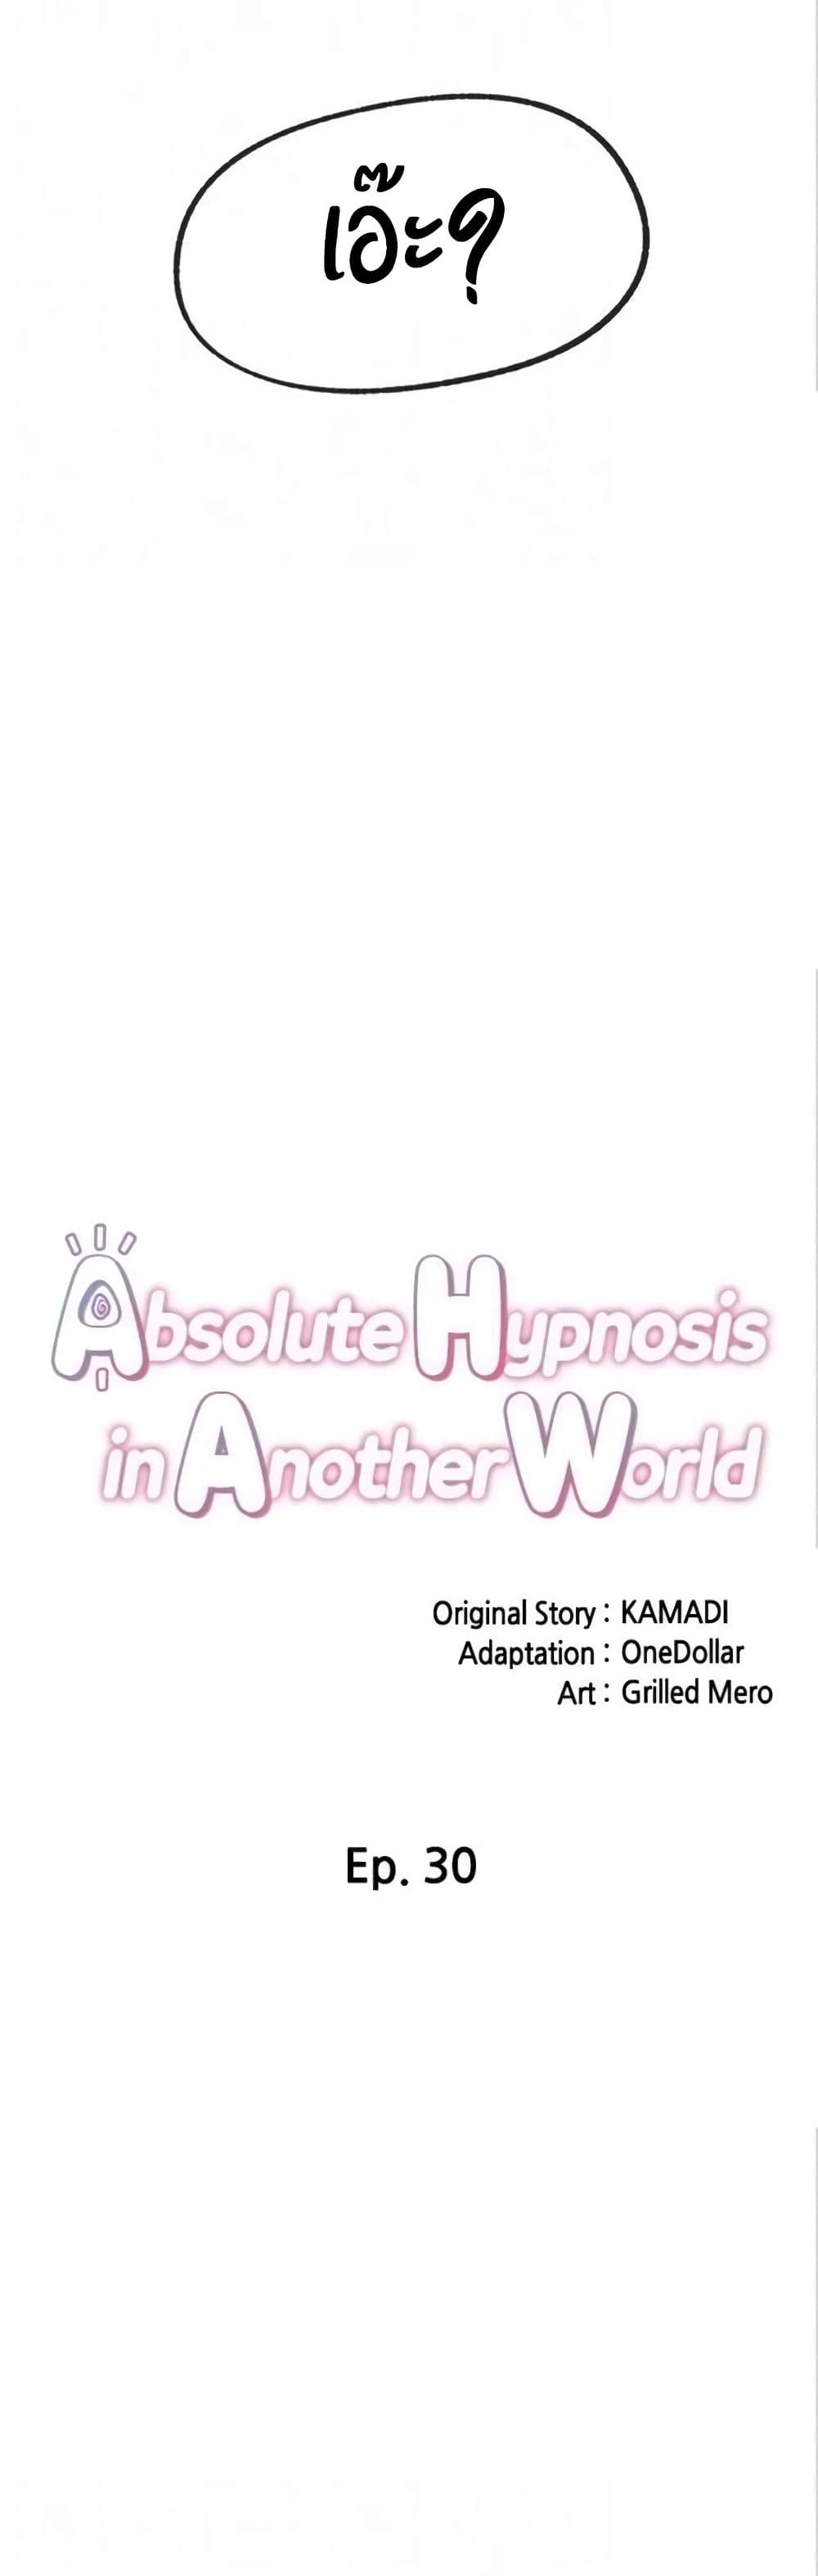 Absolute Hypnosis in Another World 30-30